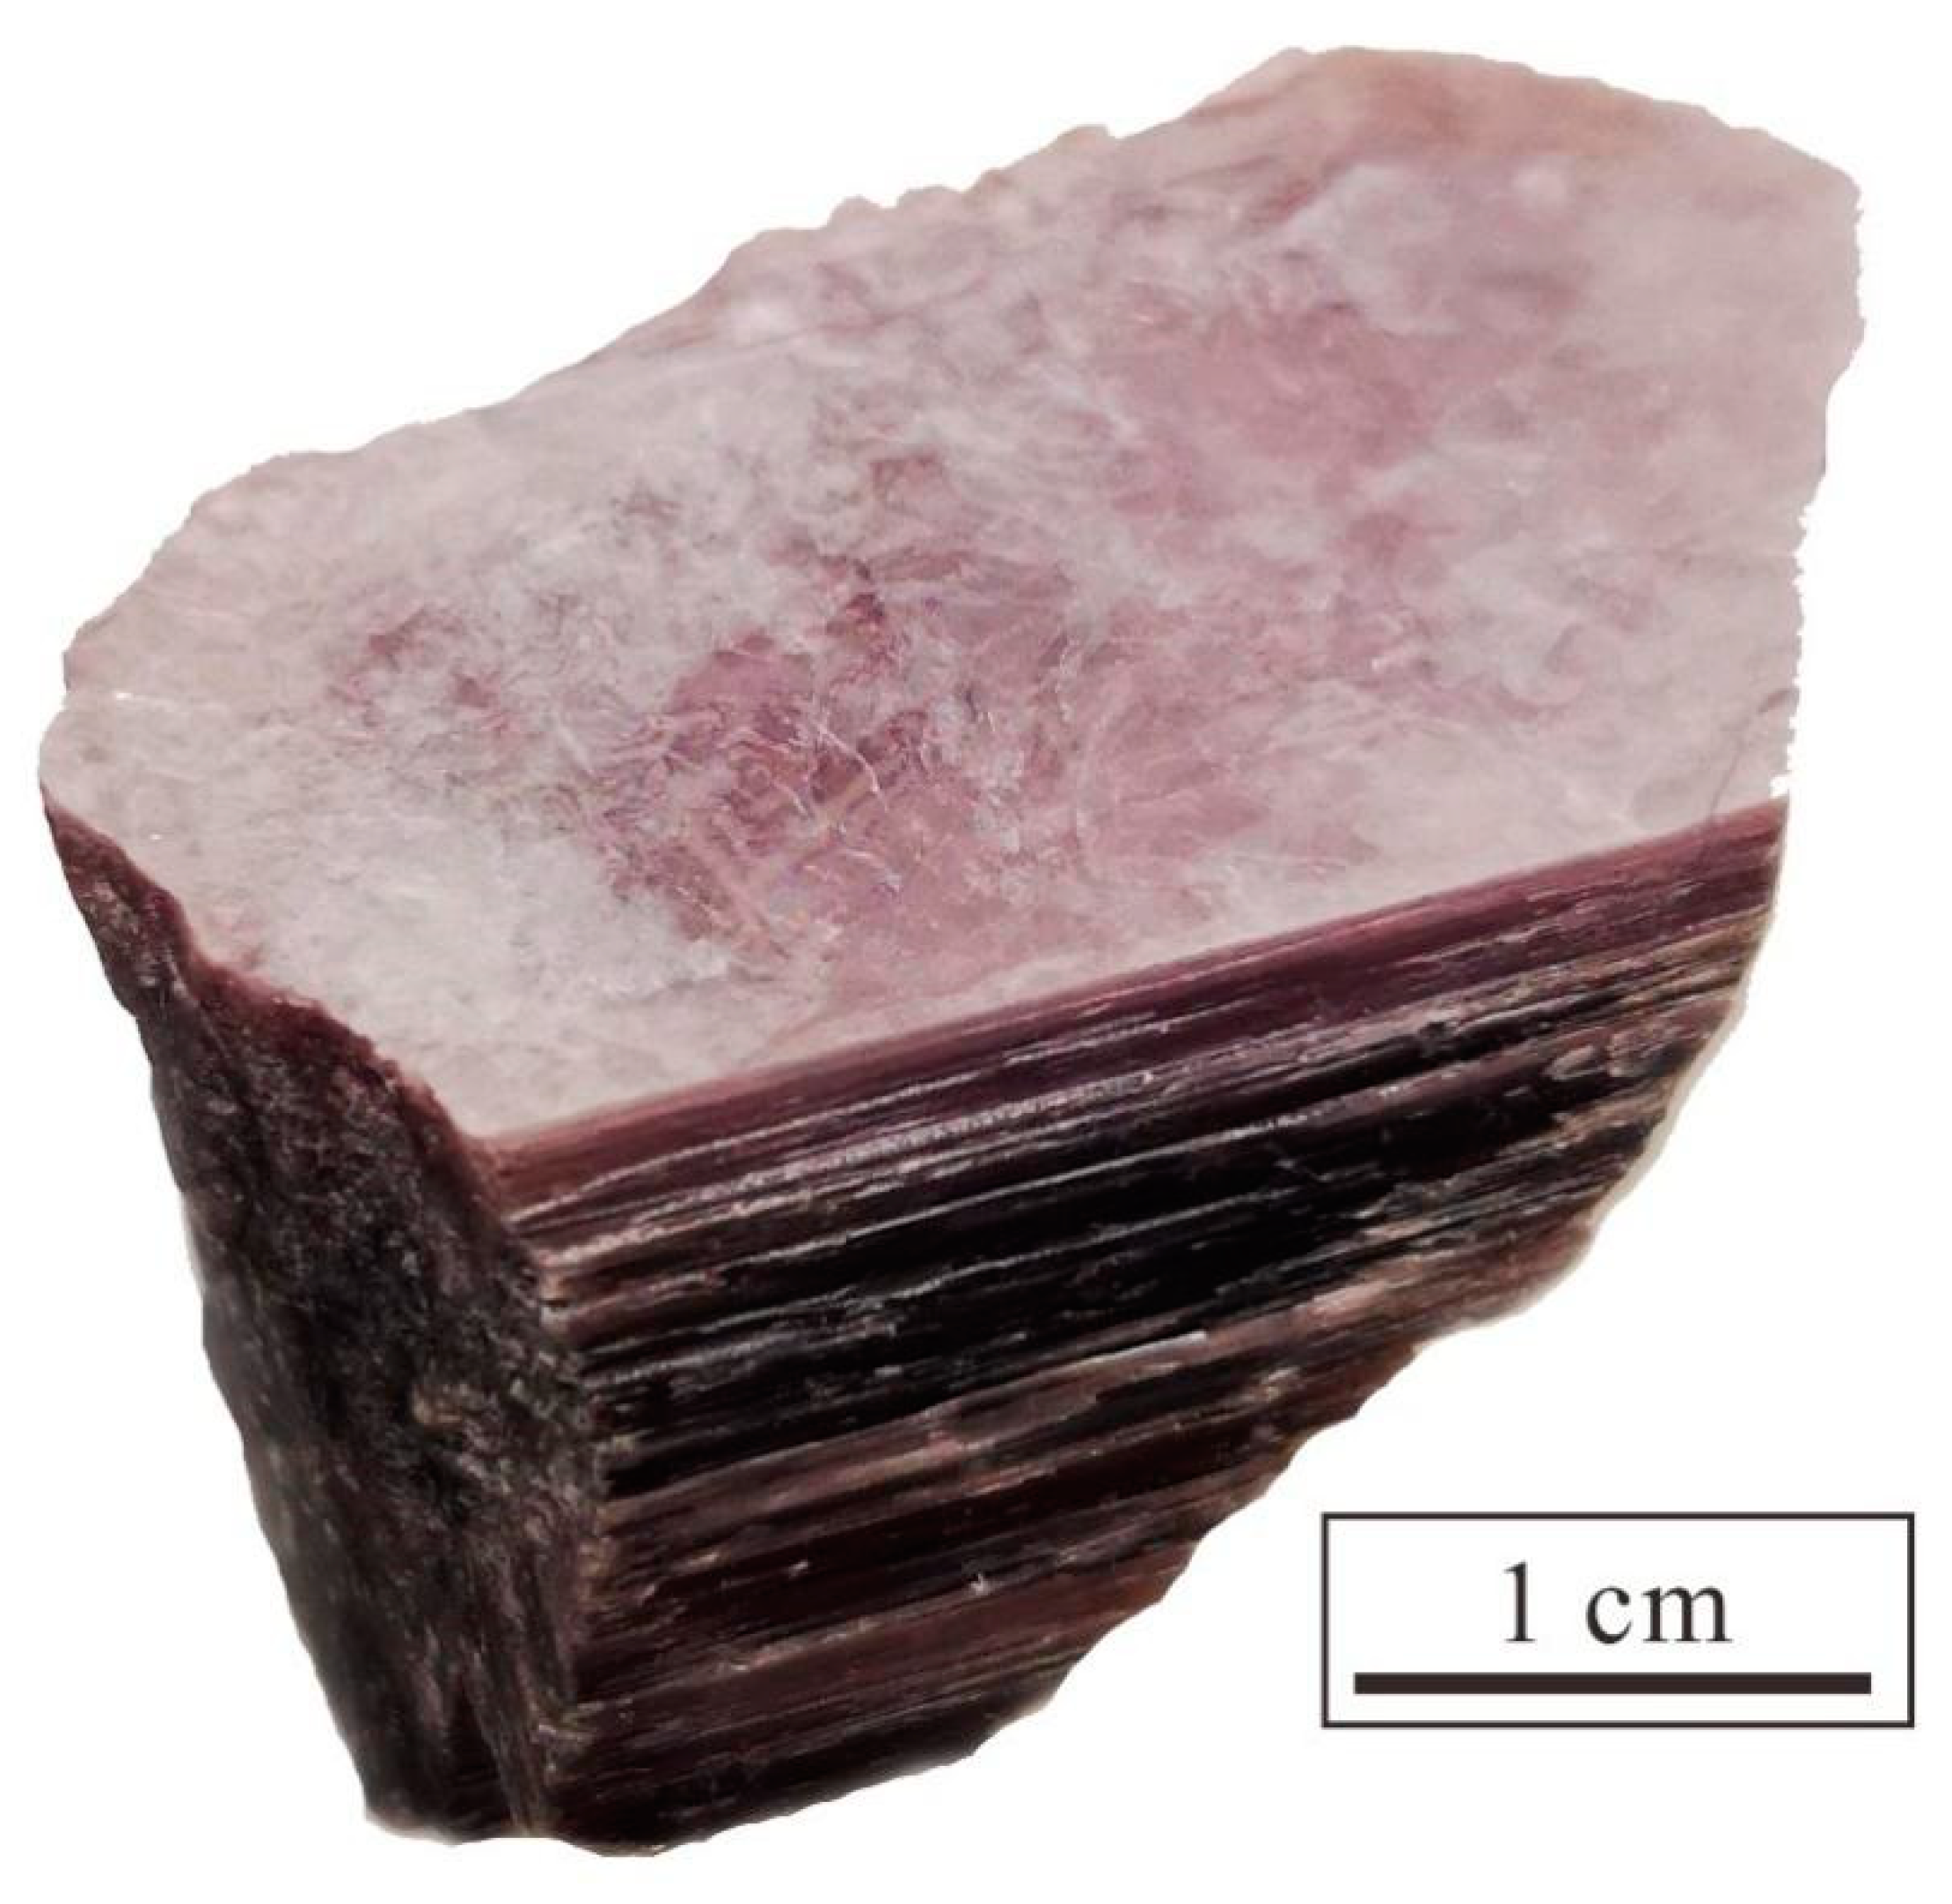 Minerals | Free Full-Text | High-Temperature Vibrational Analysis 